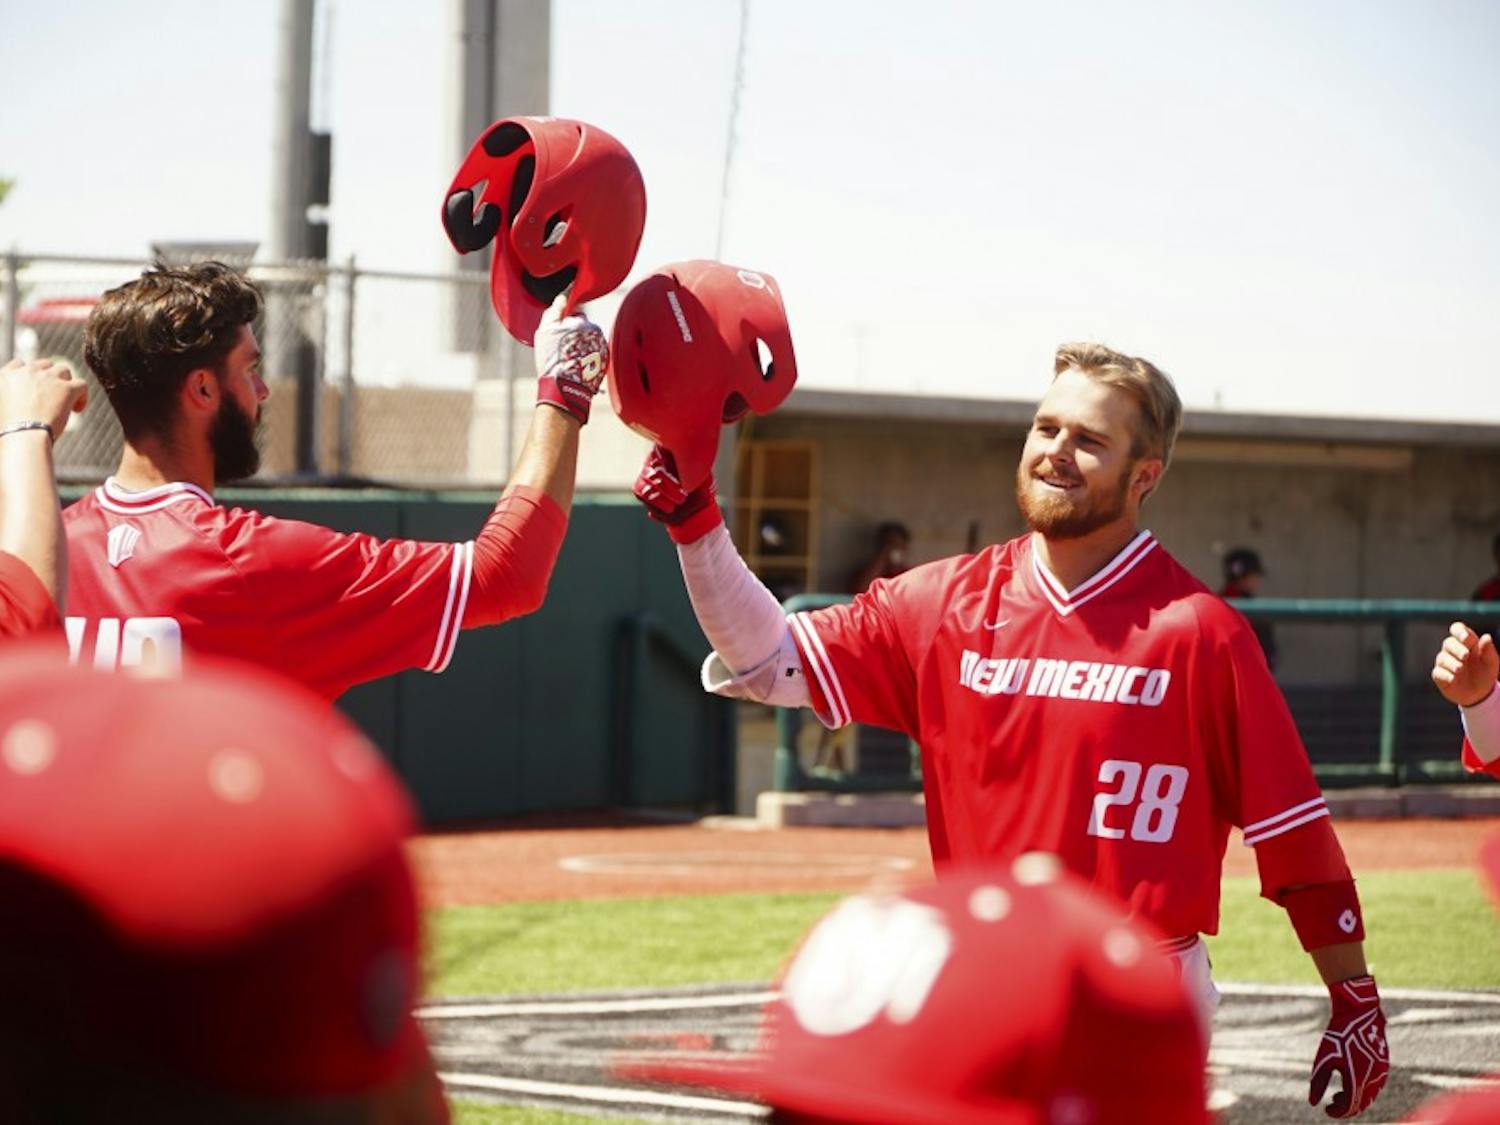 Jack Zoellner is meet by teammates  Danny Collier after hitting a 3-run homerun against UNLV on Saturday 4/21.